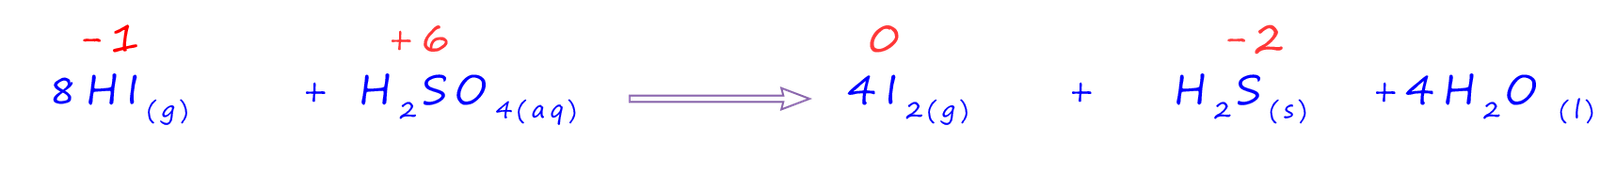 Equation for the reduction of sulfuric acid using HI to form hydrogen sulfide gas.